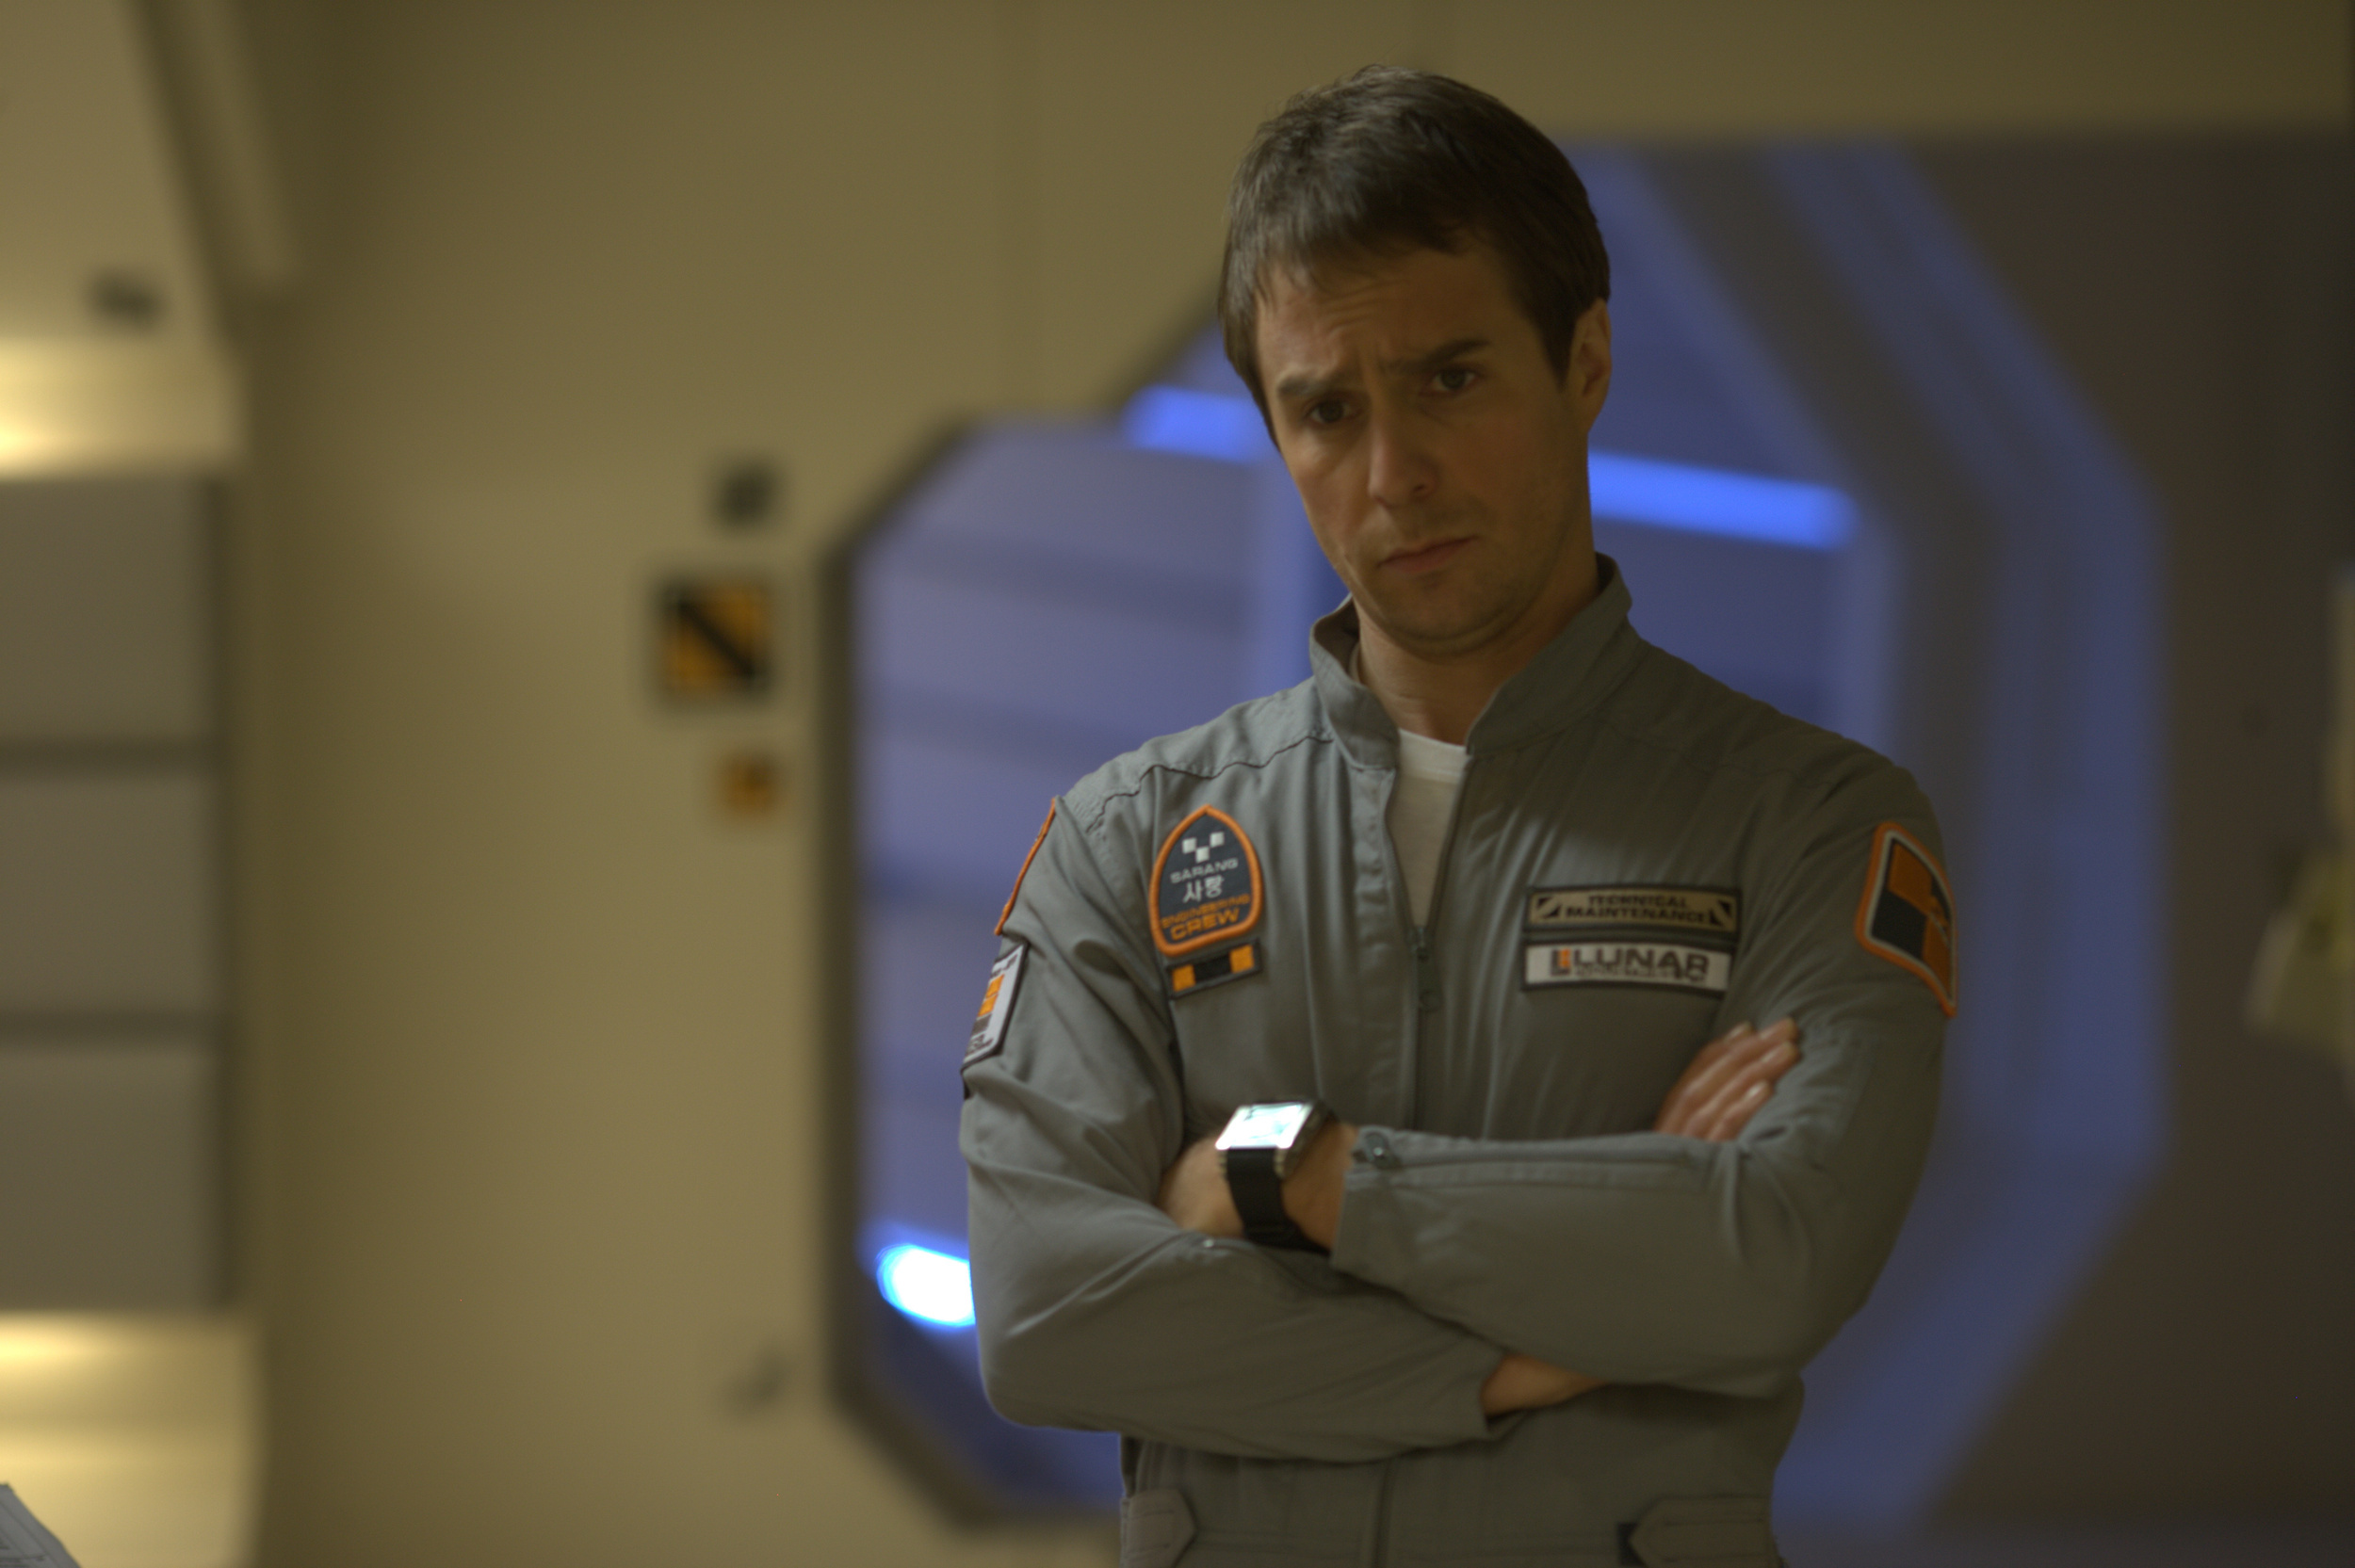 <p>Sam Rockwell gives one of his usual strong performances in <span><em>Moon</em>, </span>in which he plays a miner on the moon approaching the end of his period of service. Like the best that science fiction has to offer, <span><em>Moon</em> </span>is philosophically rich, exploring weighty issues such as identity. It manages to do so thanks in <a href="https://pubsapp.acs.org/cen/reelscience/reviews/moon/"><span>part to the rigor of its science</span></a>. Rather than immersing the viewer in the bombastic special effects so common in the genre, it hews much more closely to how mining on the moon would actually look, which grants it its claustrophobic feel.</p><p>You may also like: <a href='https://www.yardbarker.com/entertainment/articles/20_facts_you_might_not_know_about_the_dark_knight_rises_030724/s1__37722618'>20 facts you might not know about 'The Dark Knight Rises'</a></p>